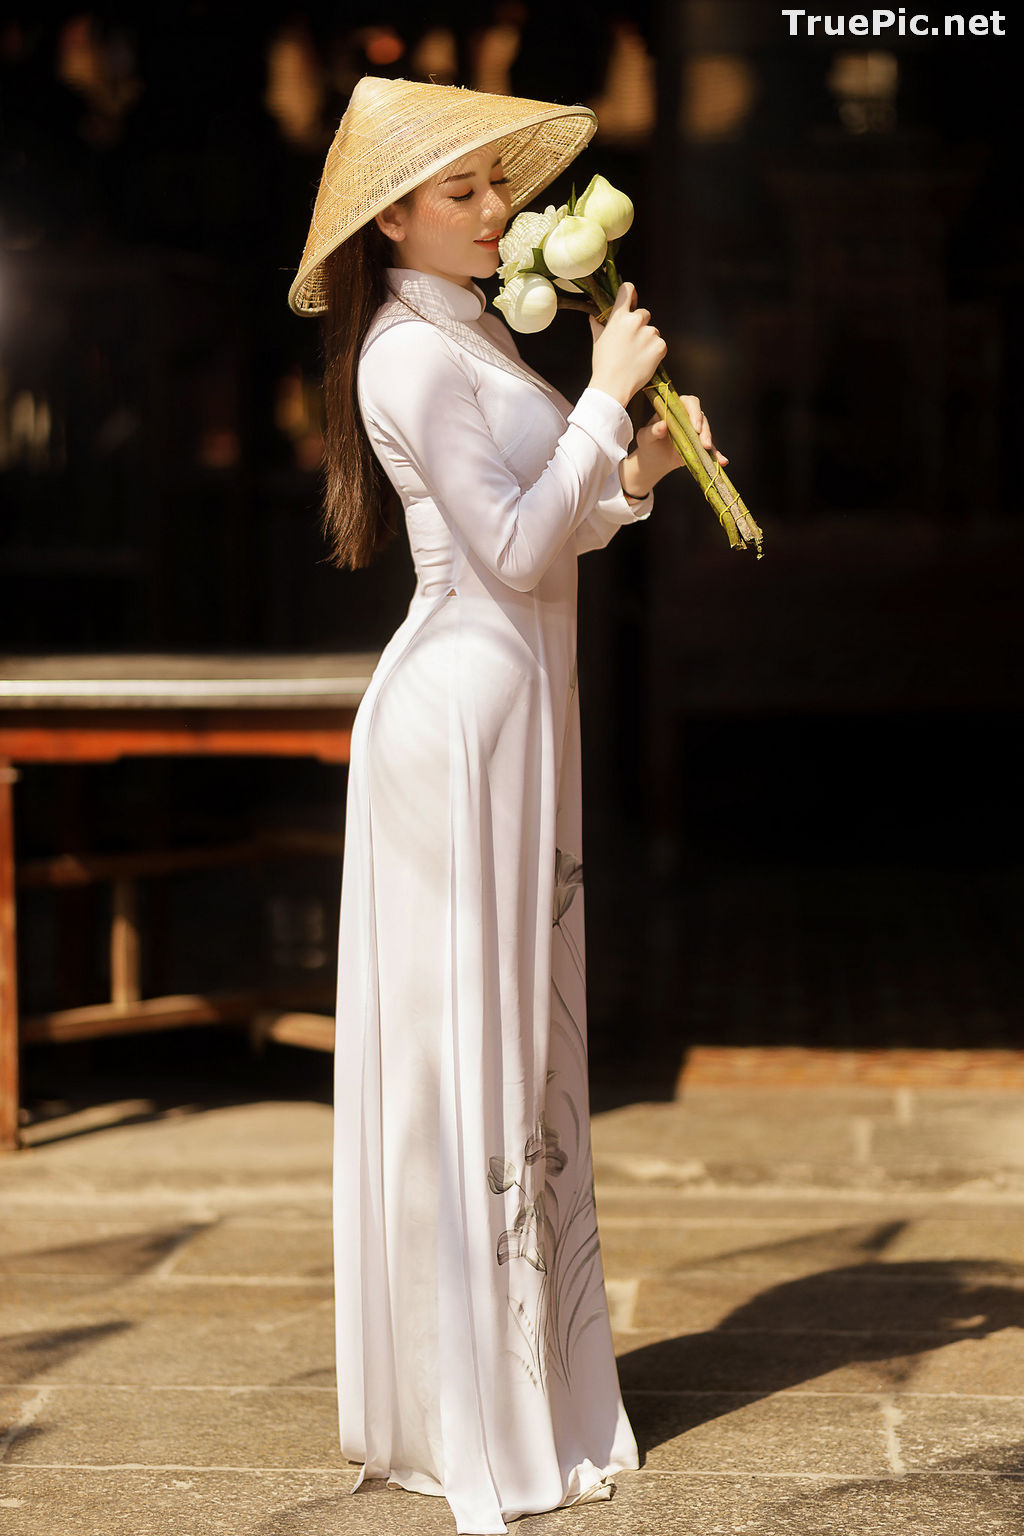 Image The Beauty of Vietnamese Girls with Traditional Dress (Ao Dai) #2 - TruePic.net - Picture-64